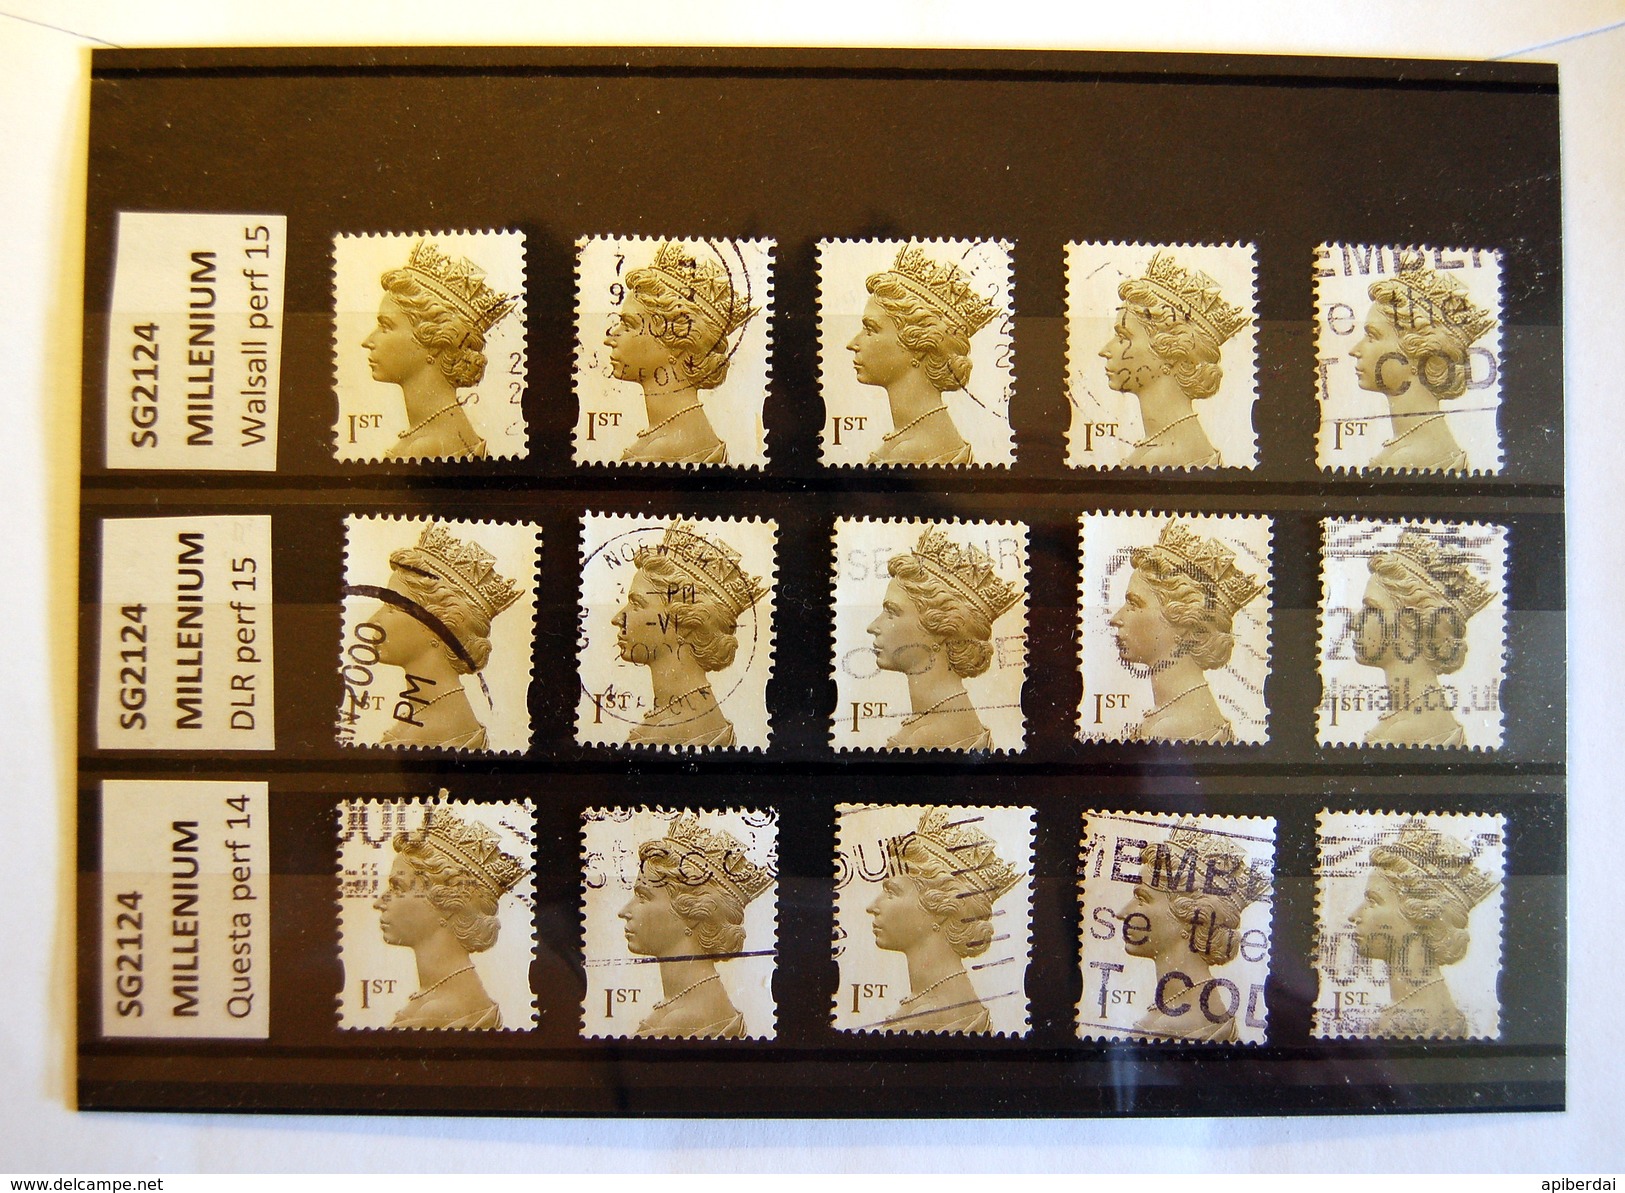 Great Britain - Machin SG2124 / 2124D Stamps 1st Millenium Differents Printing & Perforations * 5  (used) - Machins